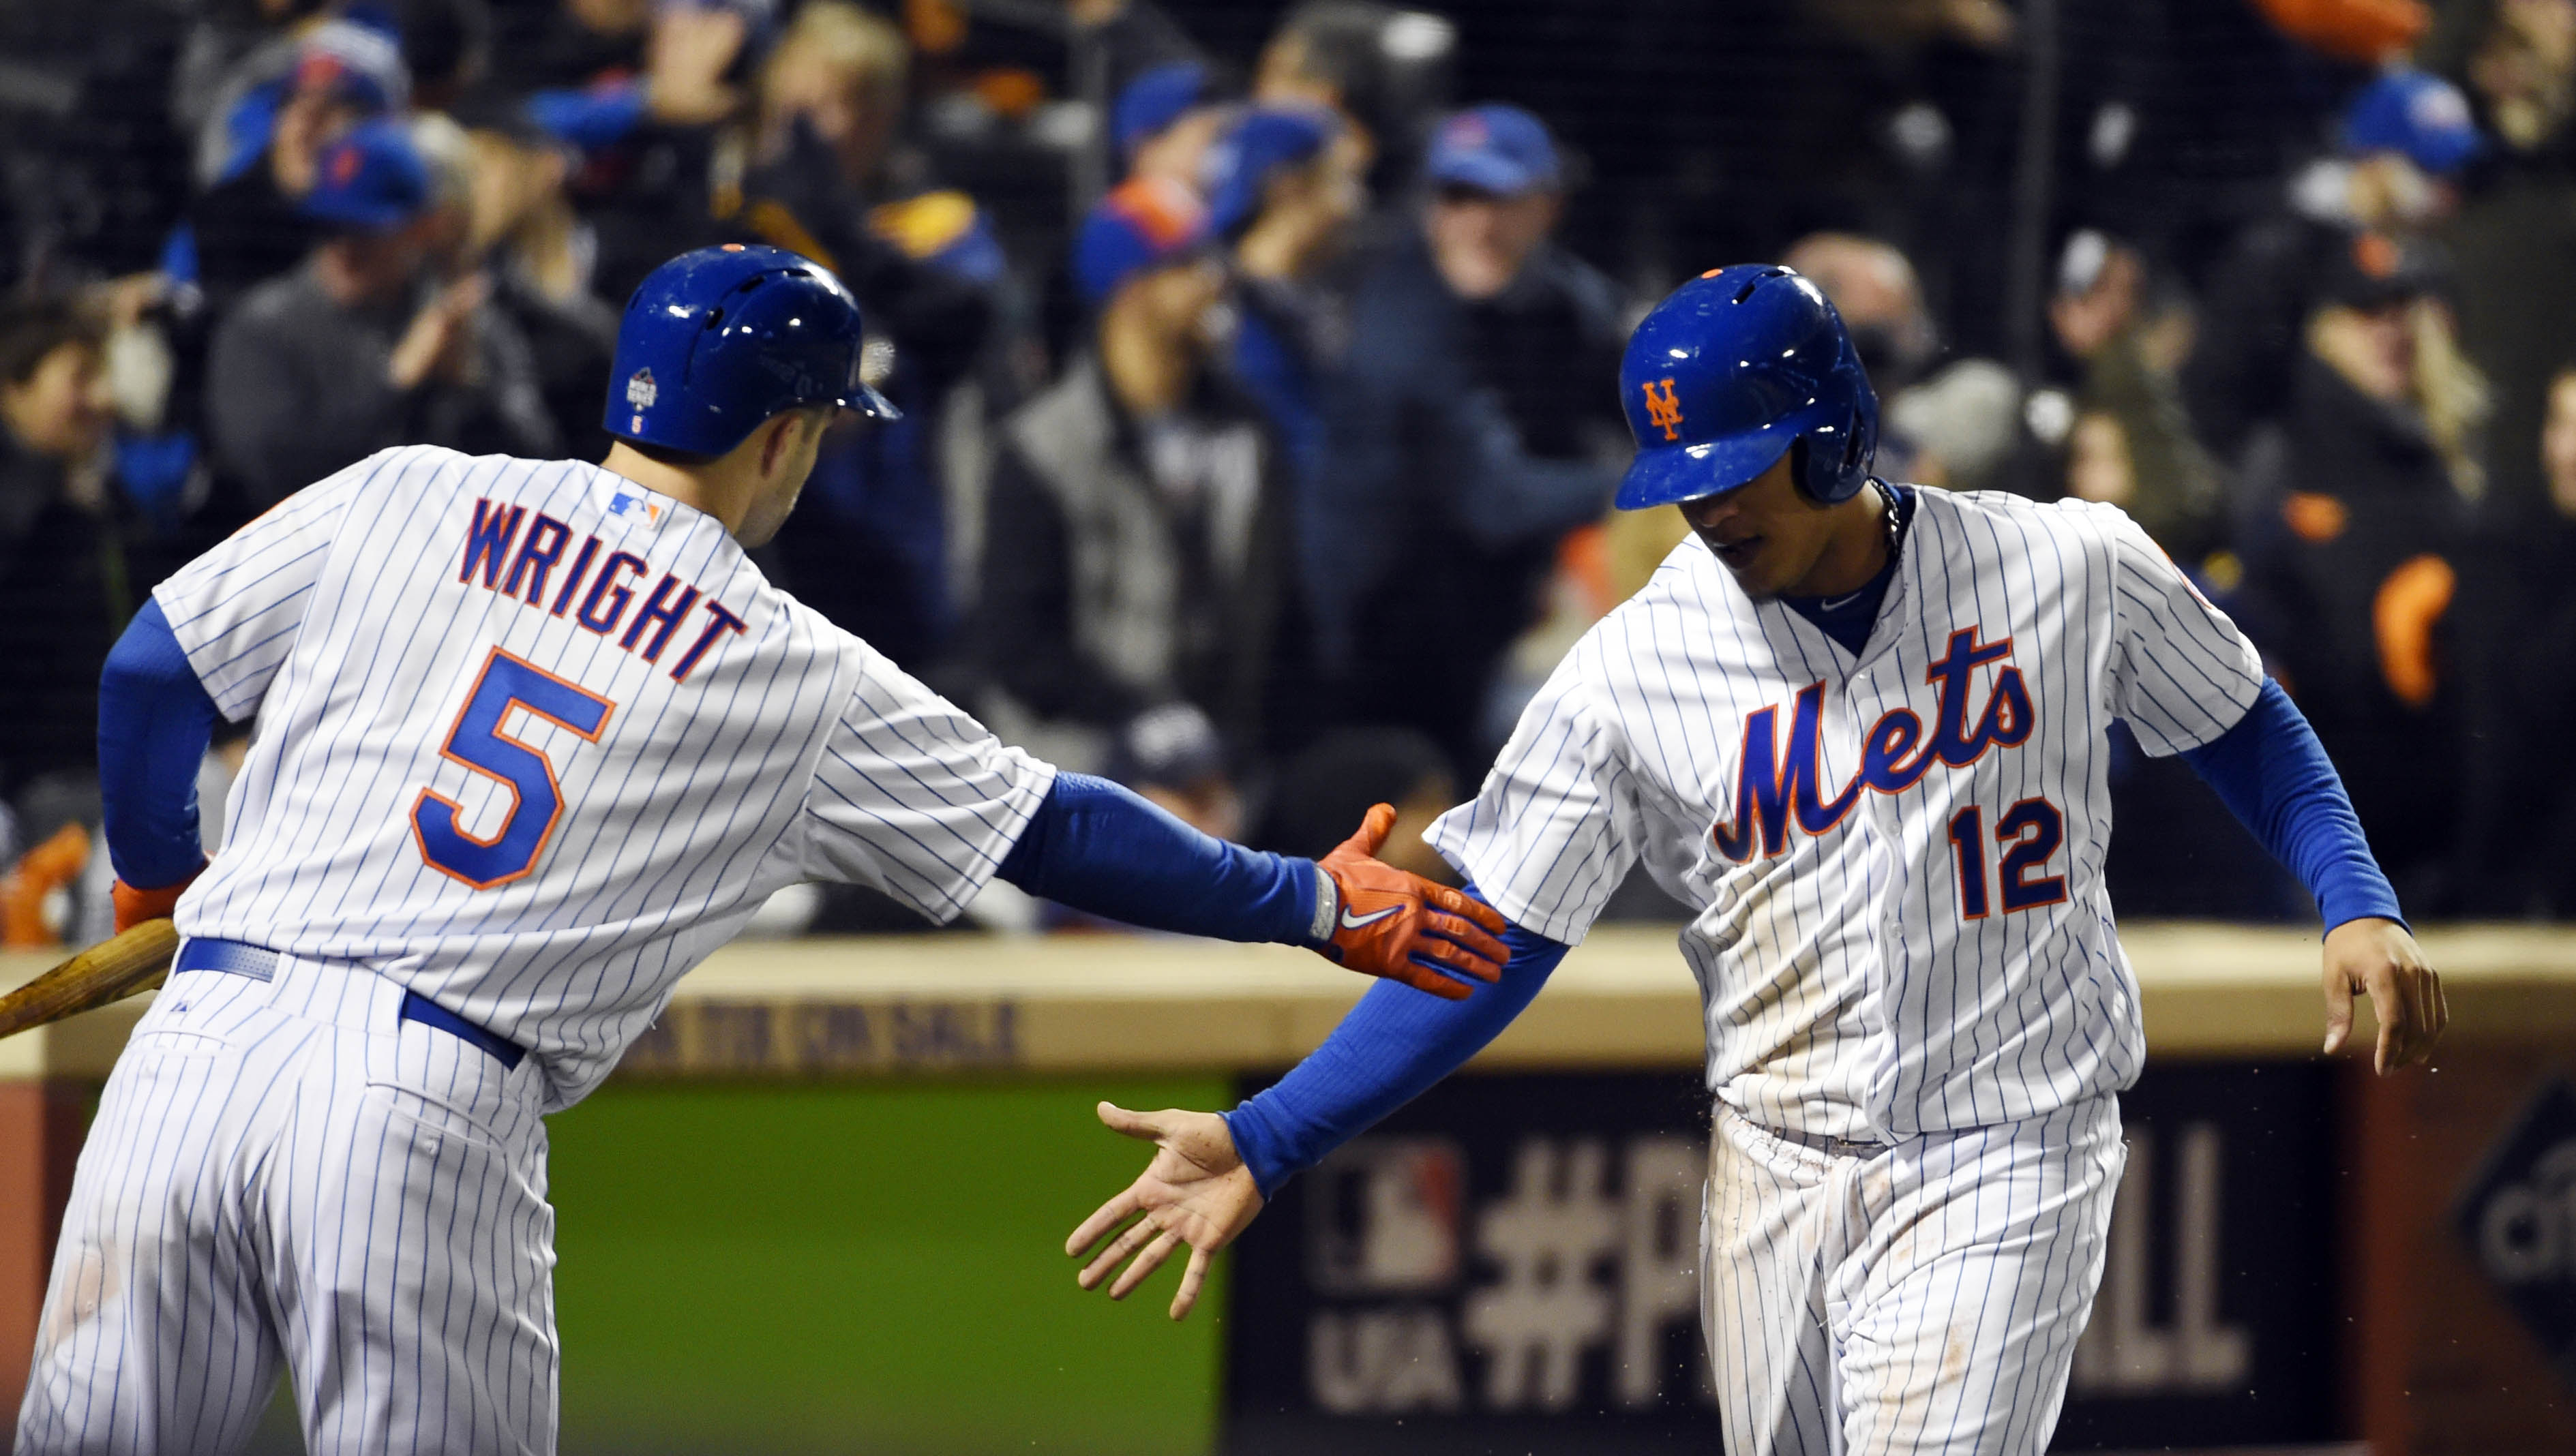 Mets beat Royals 9-3 in Game 3 of World Series - CBS News